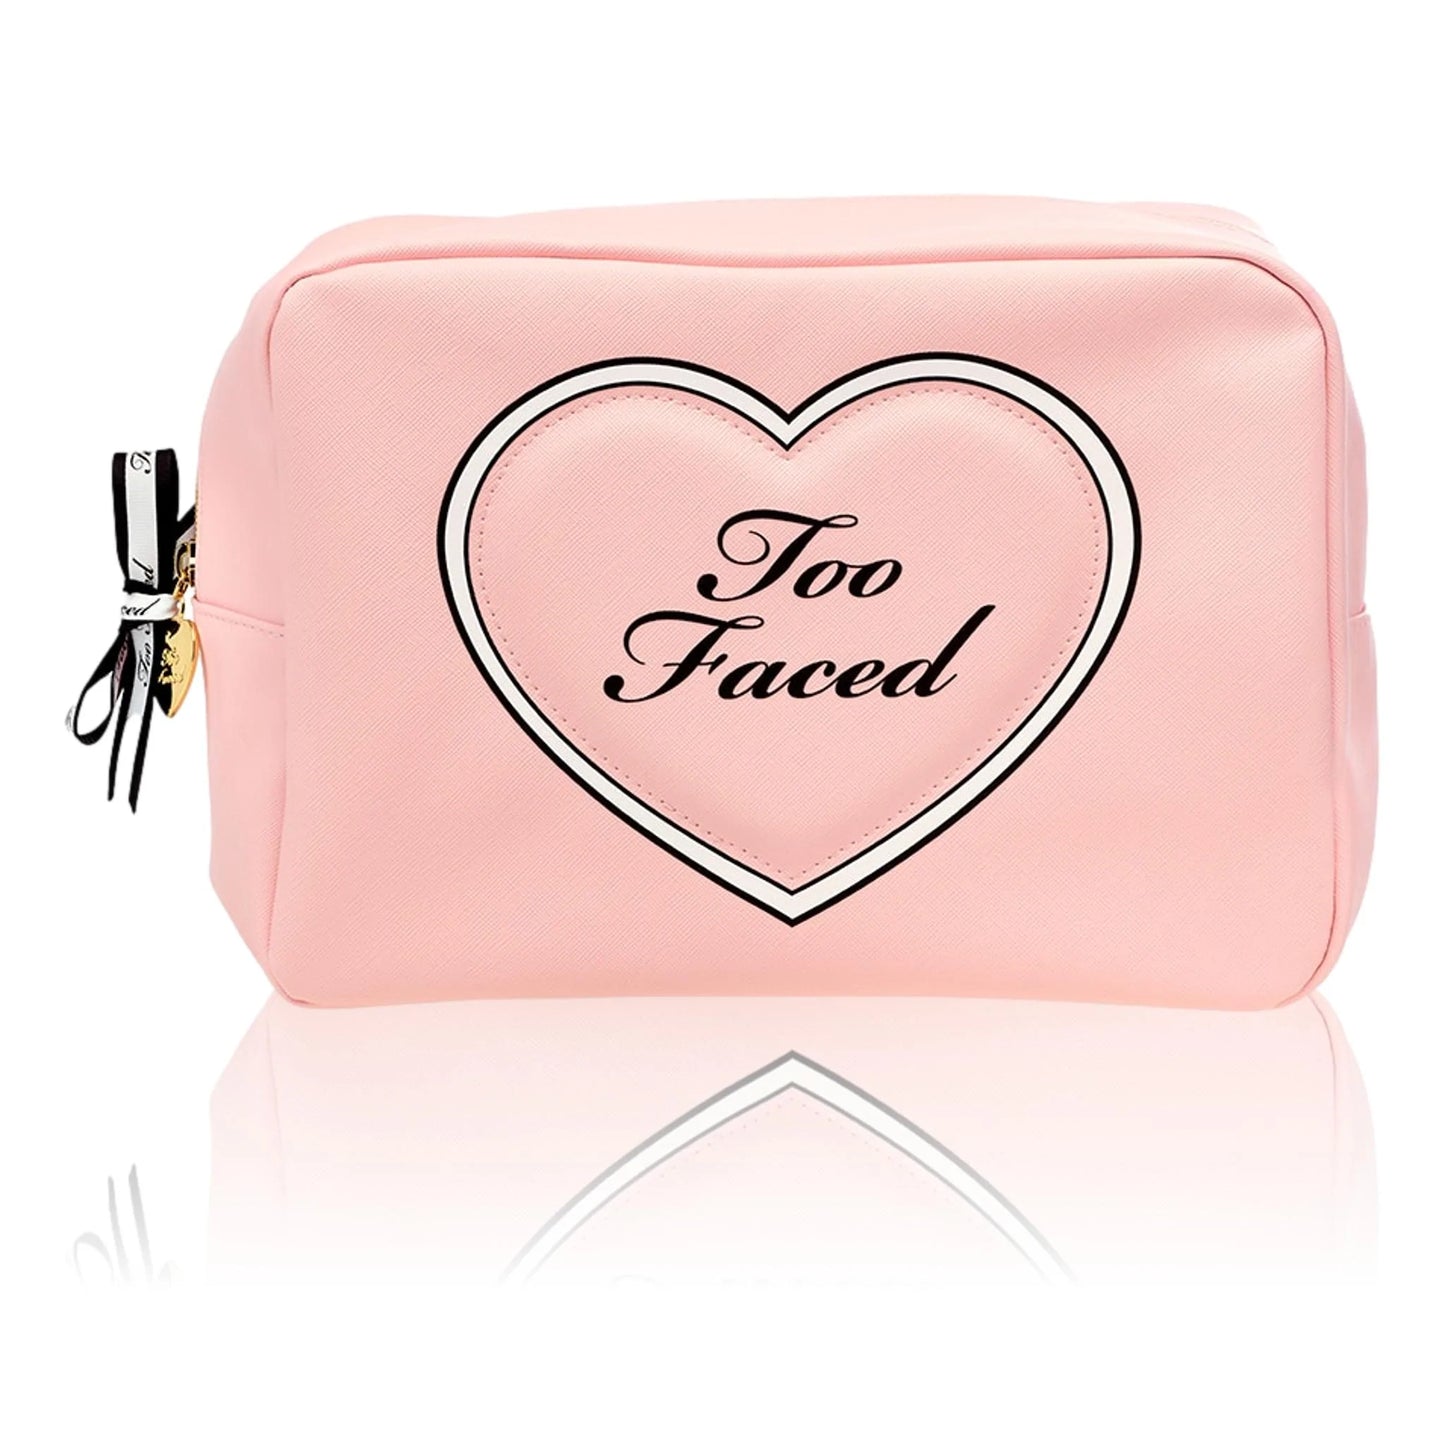 Too Faced - Leave Nothing Behind SUPERBIG Cosmetic Bag